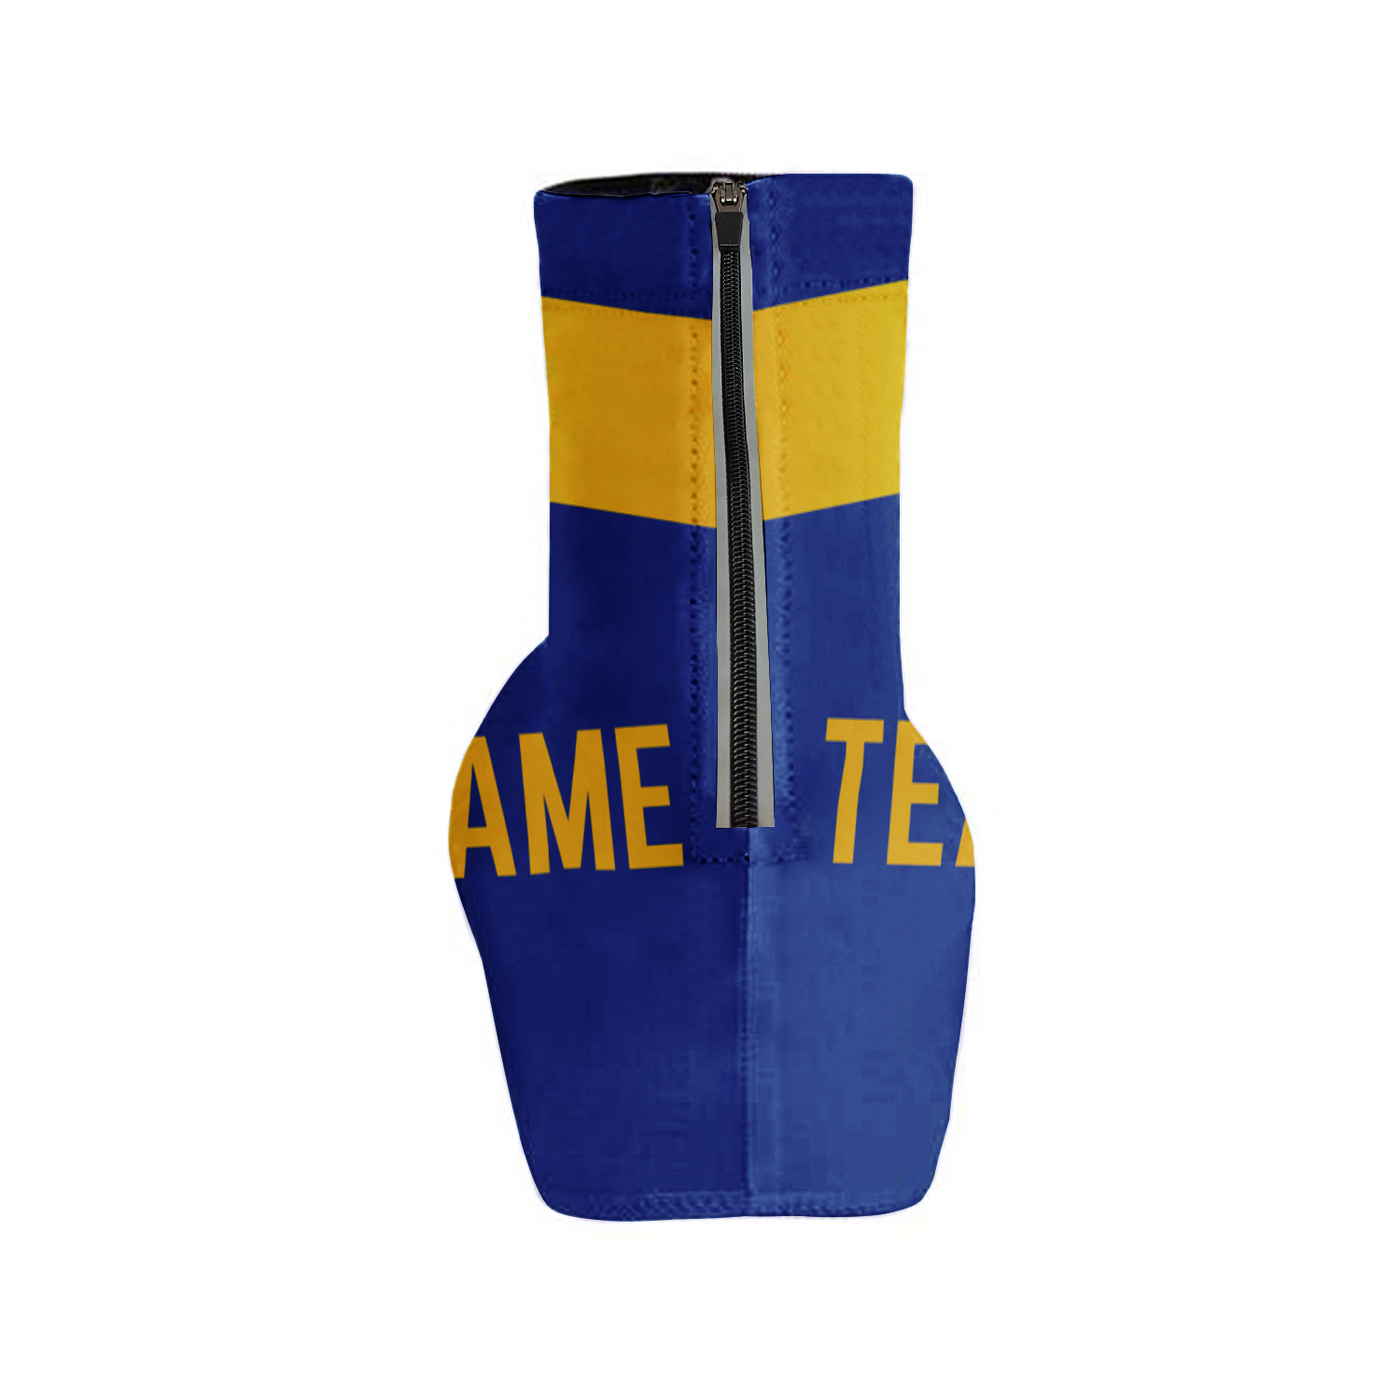 Customized Los Angeles Team Cycling Shoe Covers